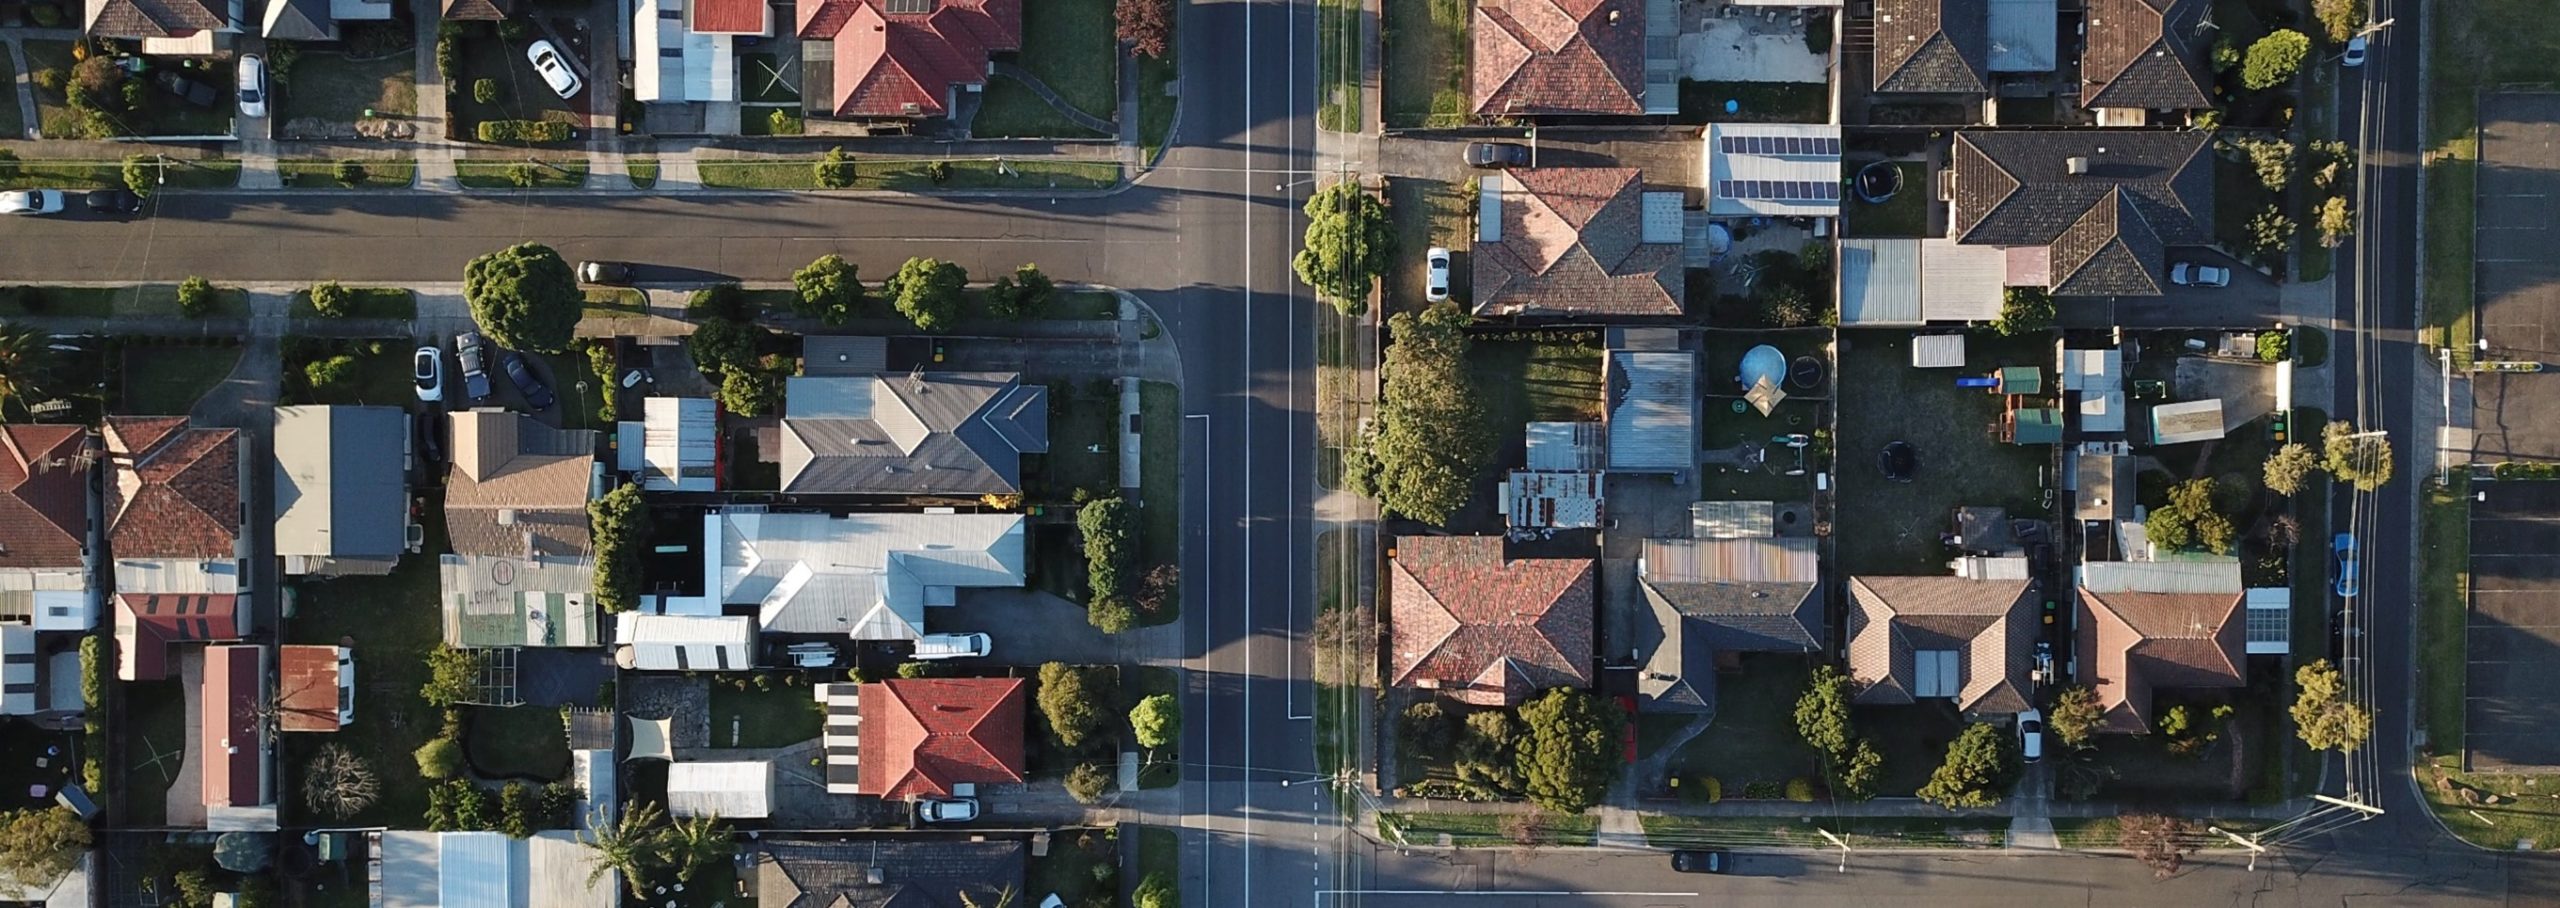 An image that shows a street view of houses in blocks from above. There are many house roofs with a T road dividing them. It represents the view of a suburban neighbourhood from above